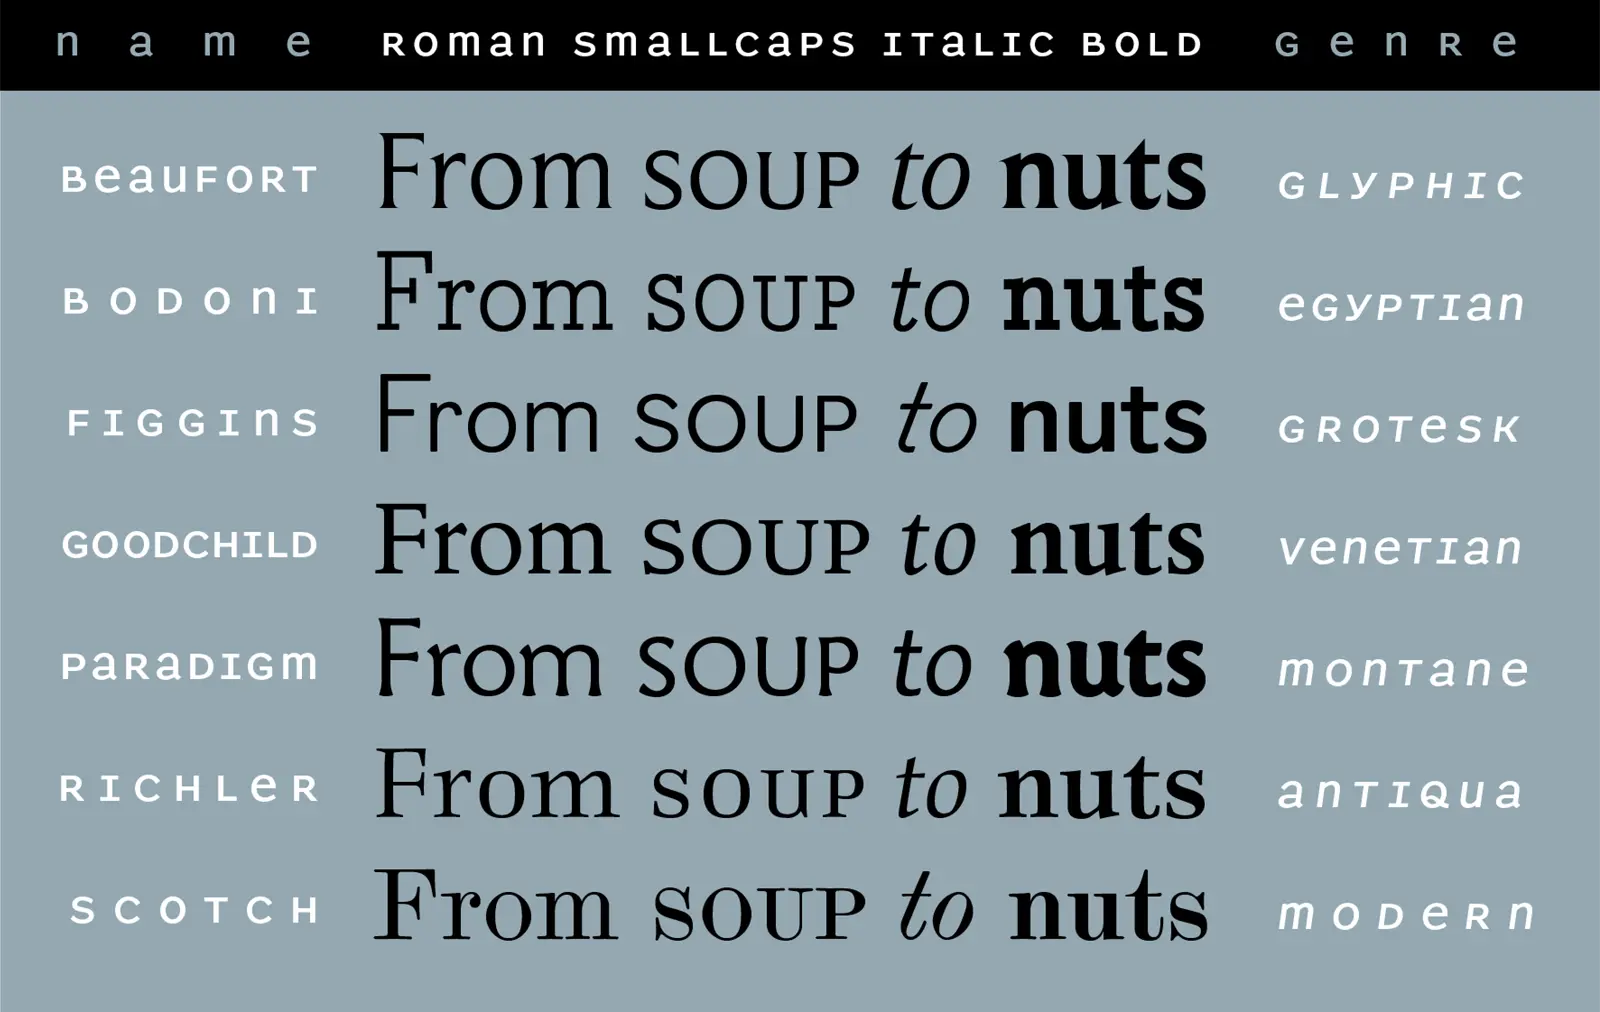 With small caps, oldstyle figures, swash characters, and extended language support for most families, Shinntype fonts feature all the bells and whistles for sophisticated text typography. 